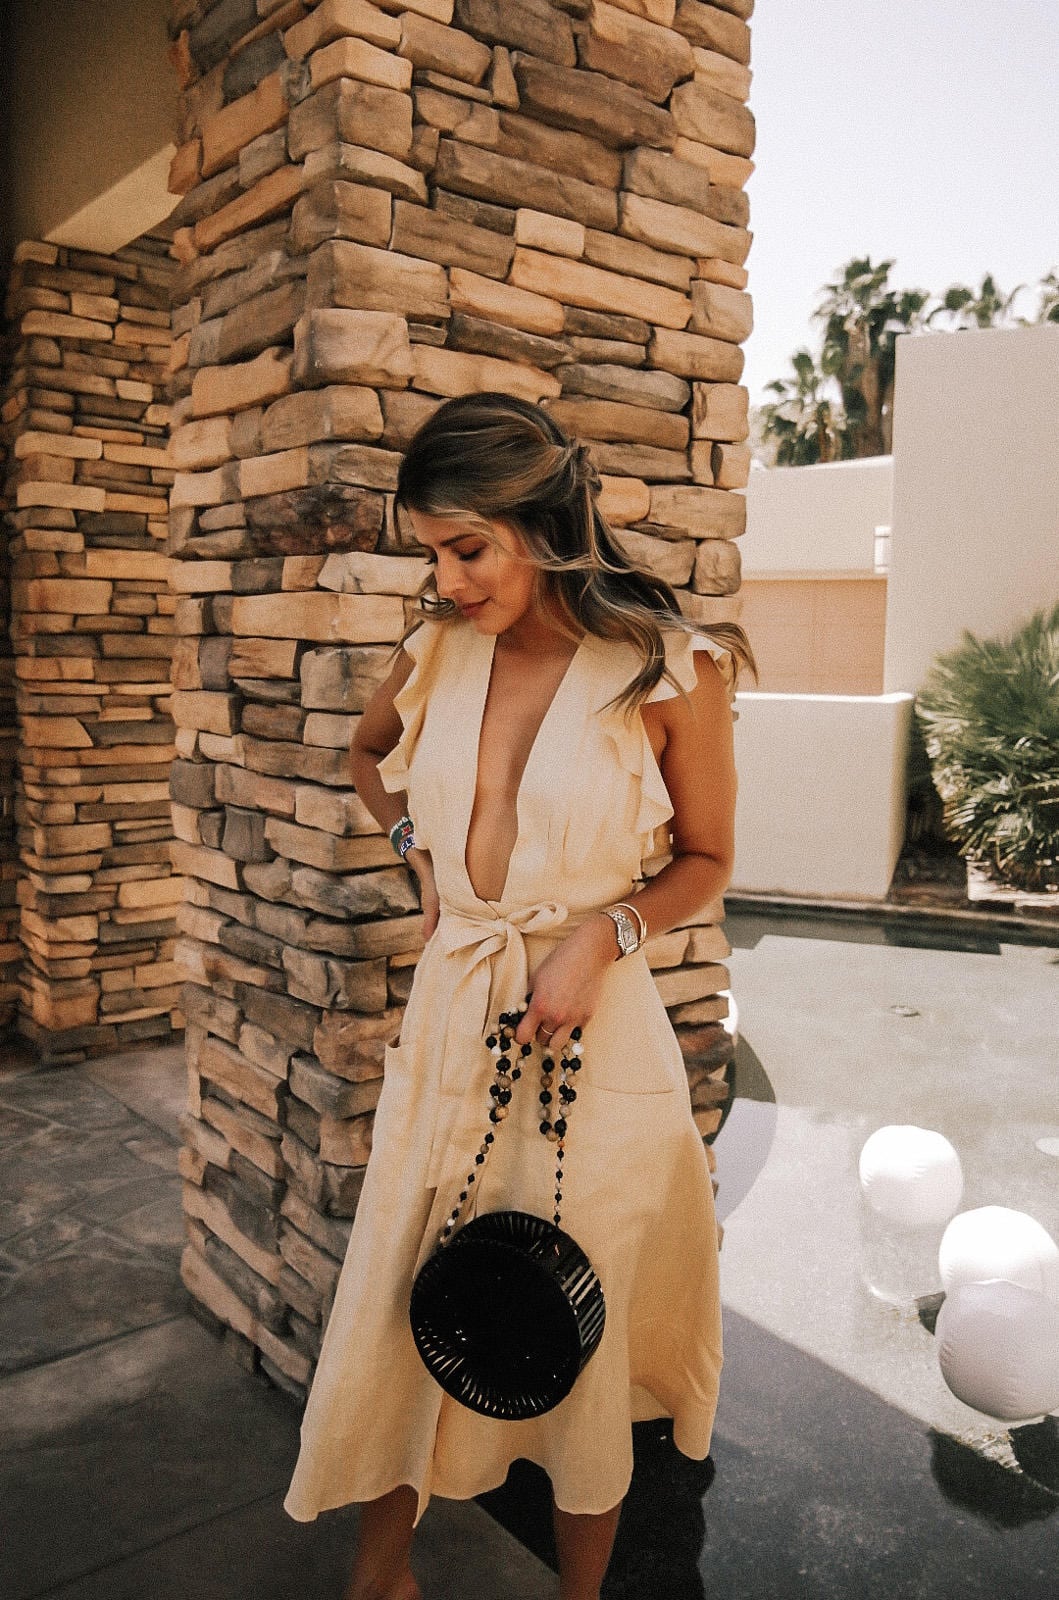 Pam Hetlinger in a Beige Reformation Dress and Circle Chain Bag, Coachella Outfits | TheGirlFromPanama.com